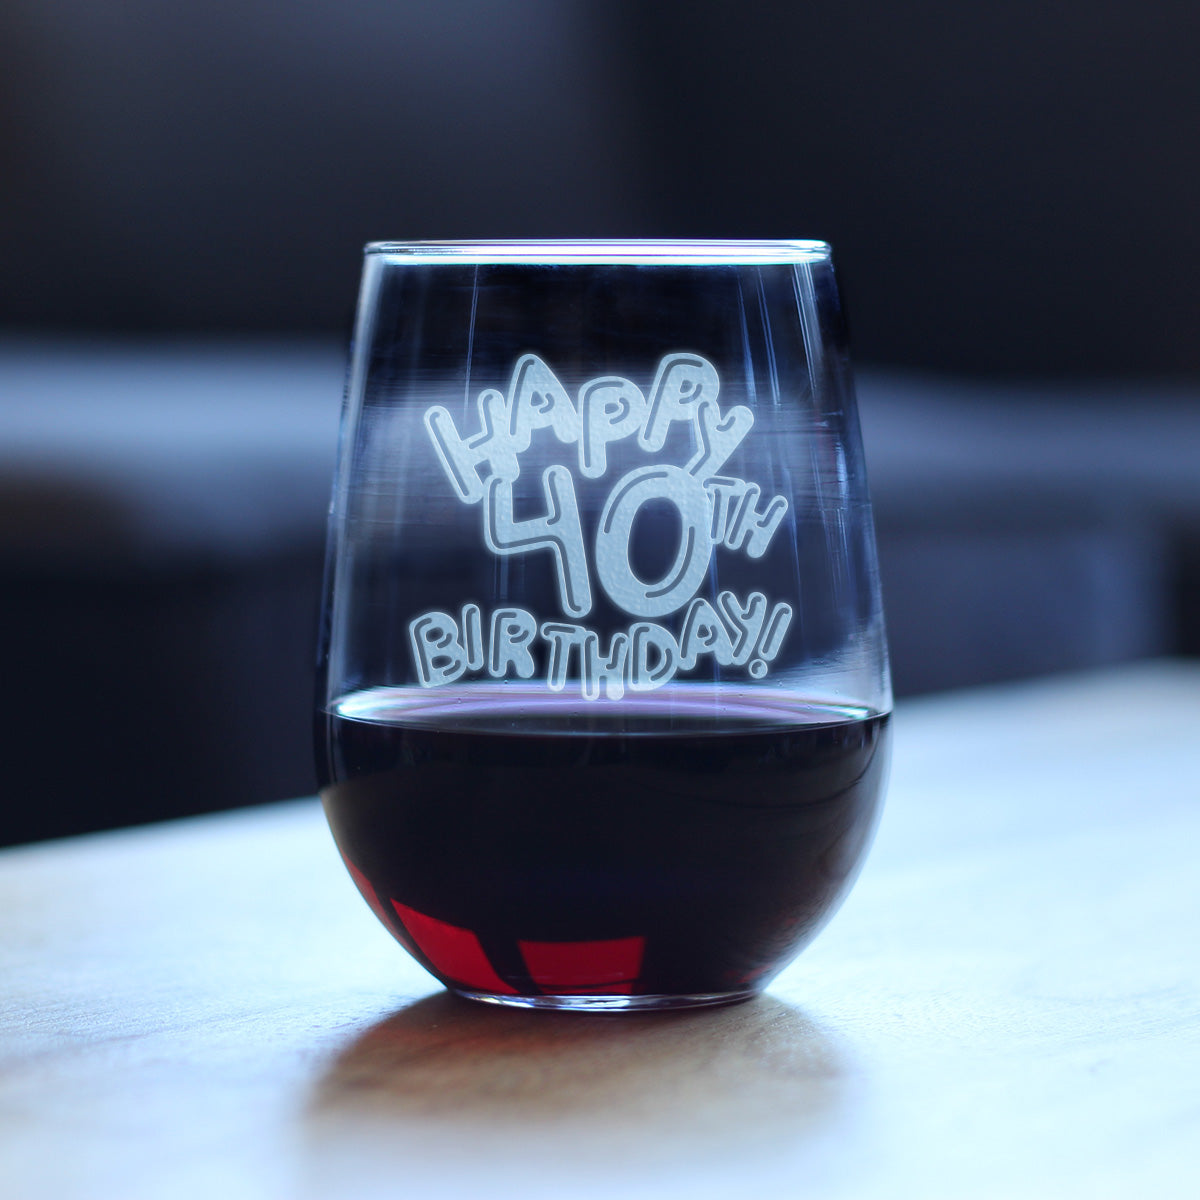 Happy 40th Birthday Balloons - Stemless Wine Glass Gifts for Women &amp; Men Turning 40 - Bday Party Decor - Large Glasses 17 Oz